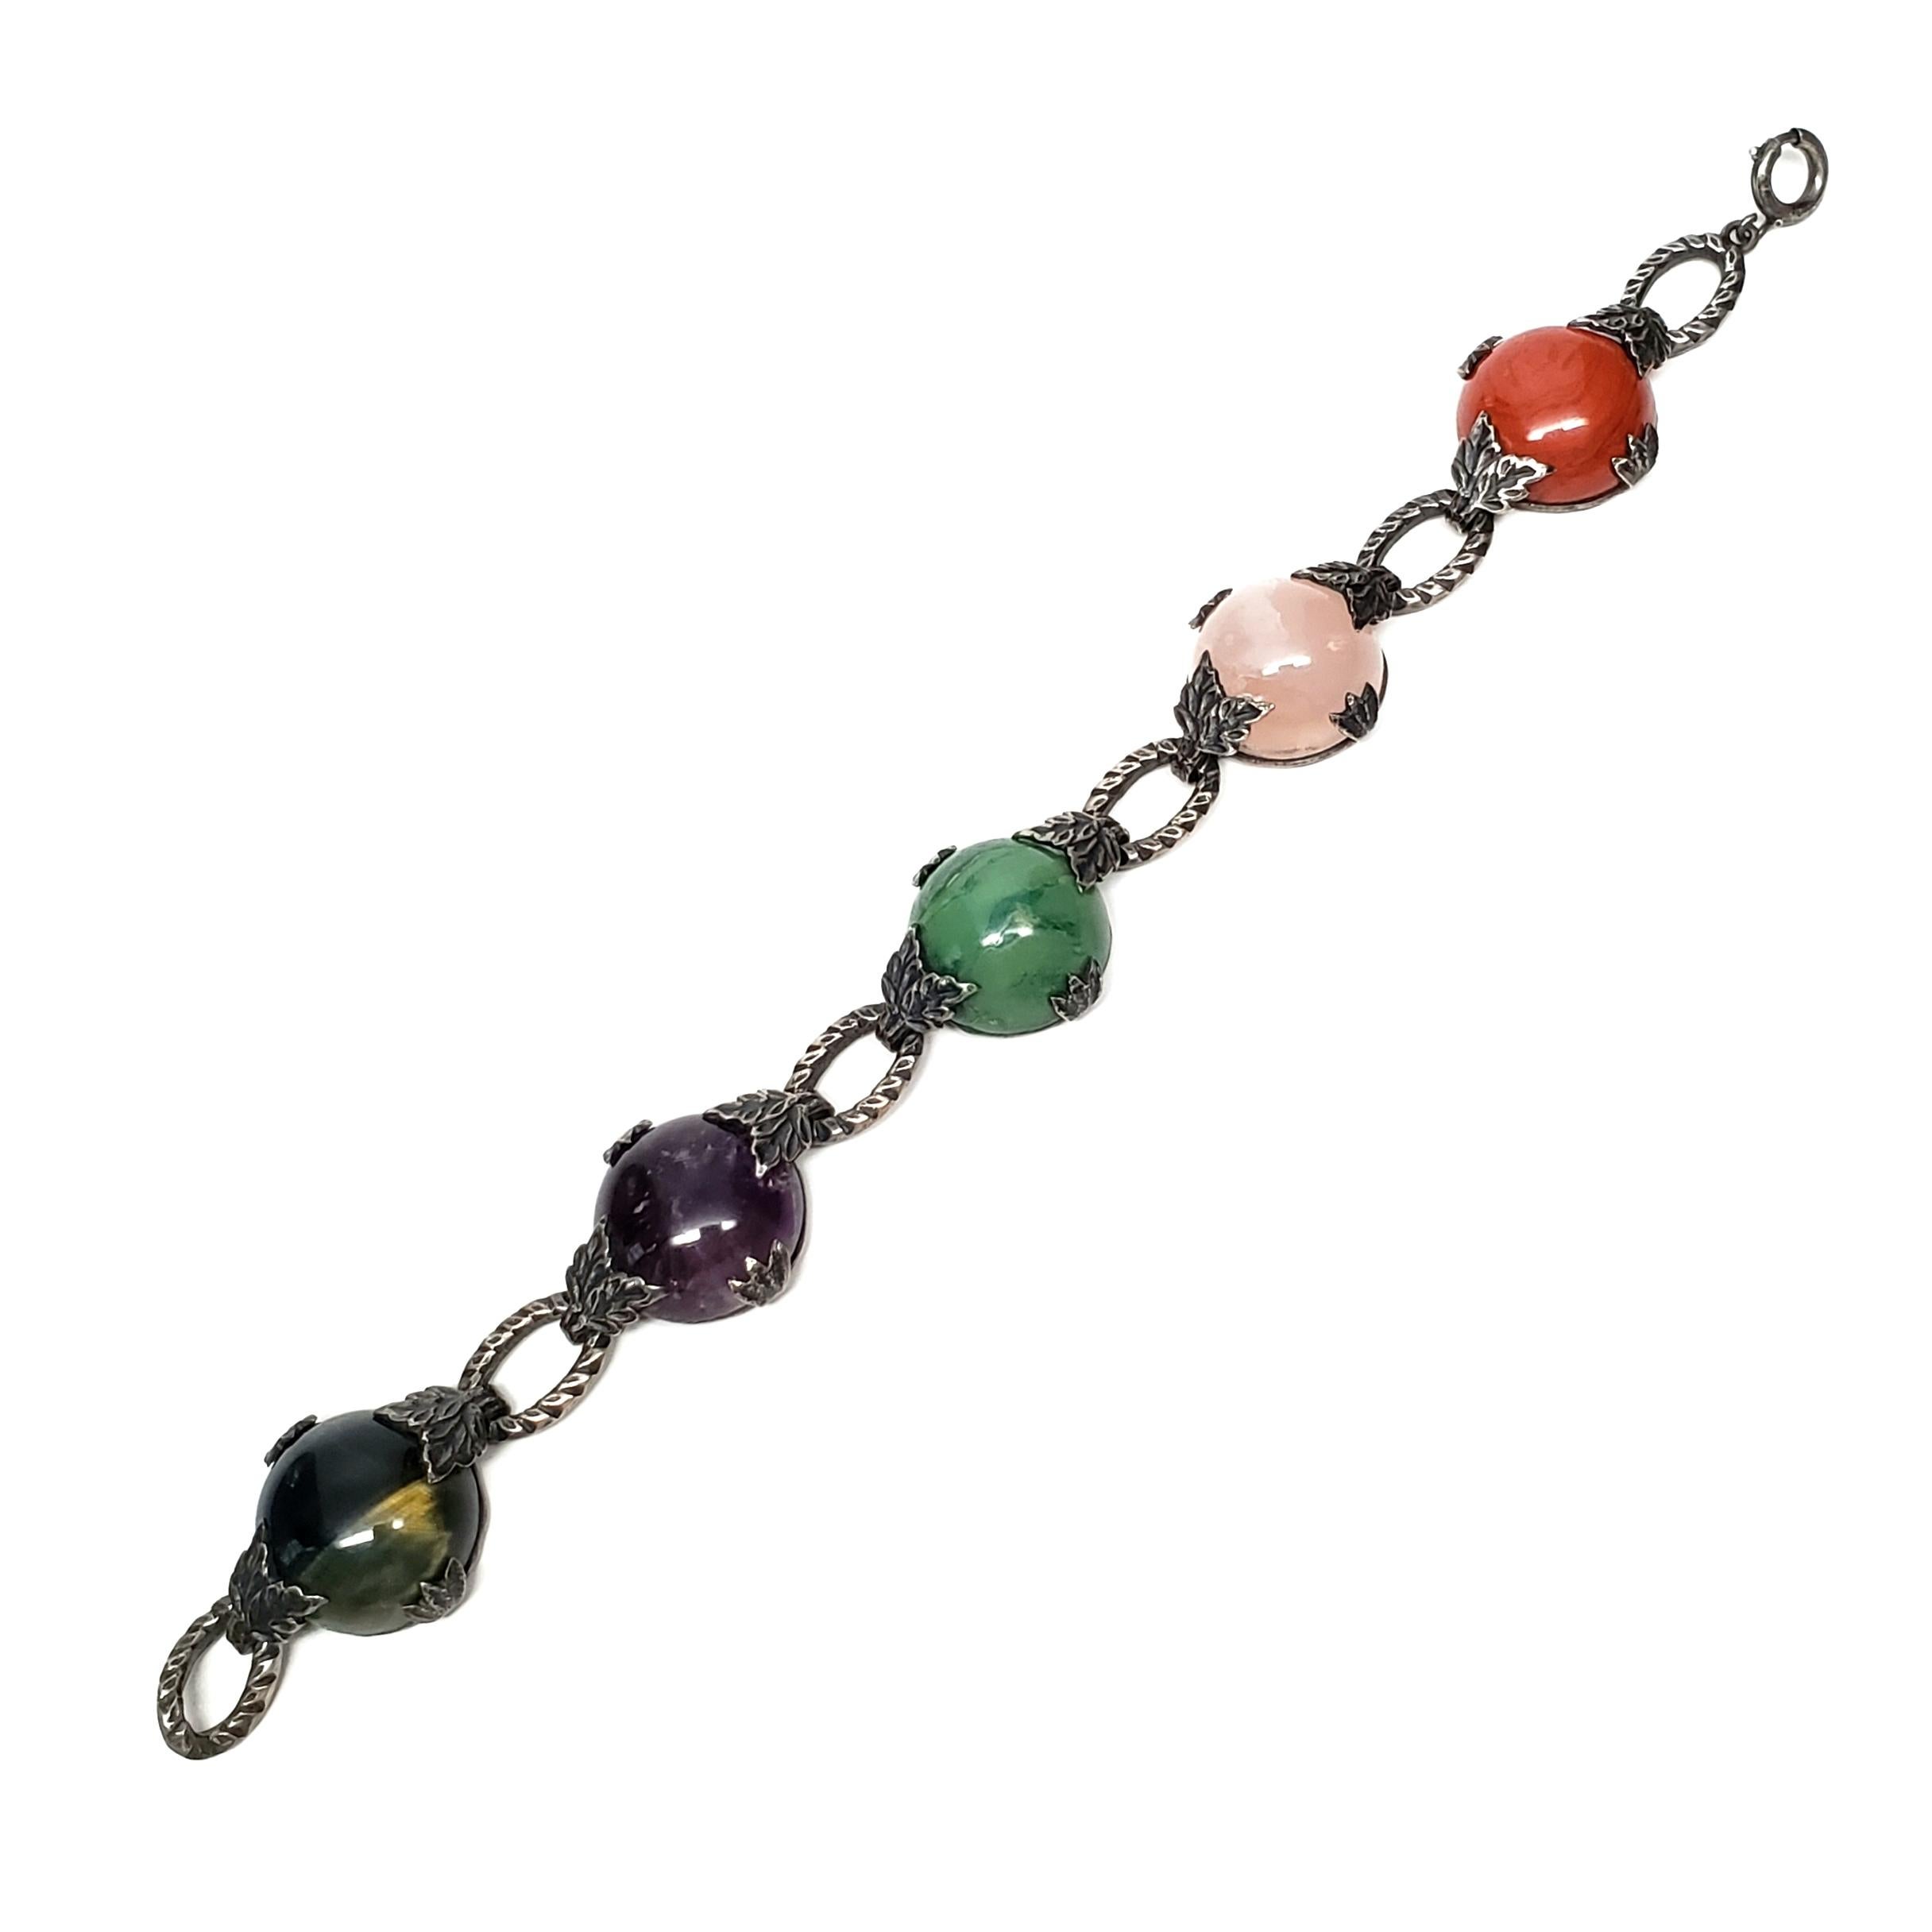 Sterling silver and multi-stone bracelet.

Features round cabochon stones set in leaf prongs, alternating with textured oval links. Stones appear to be jade, carnelian, tiger's eye, quartz and amethyst.

Measures approx 7